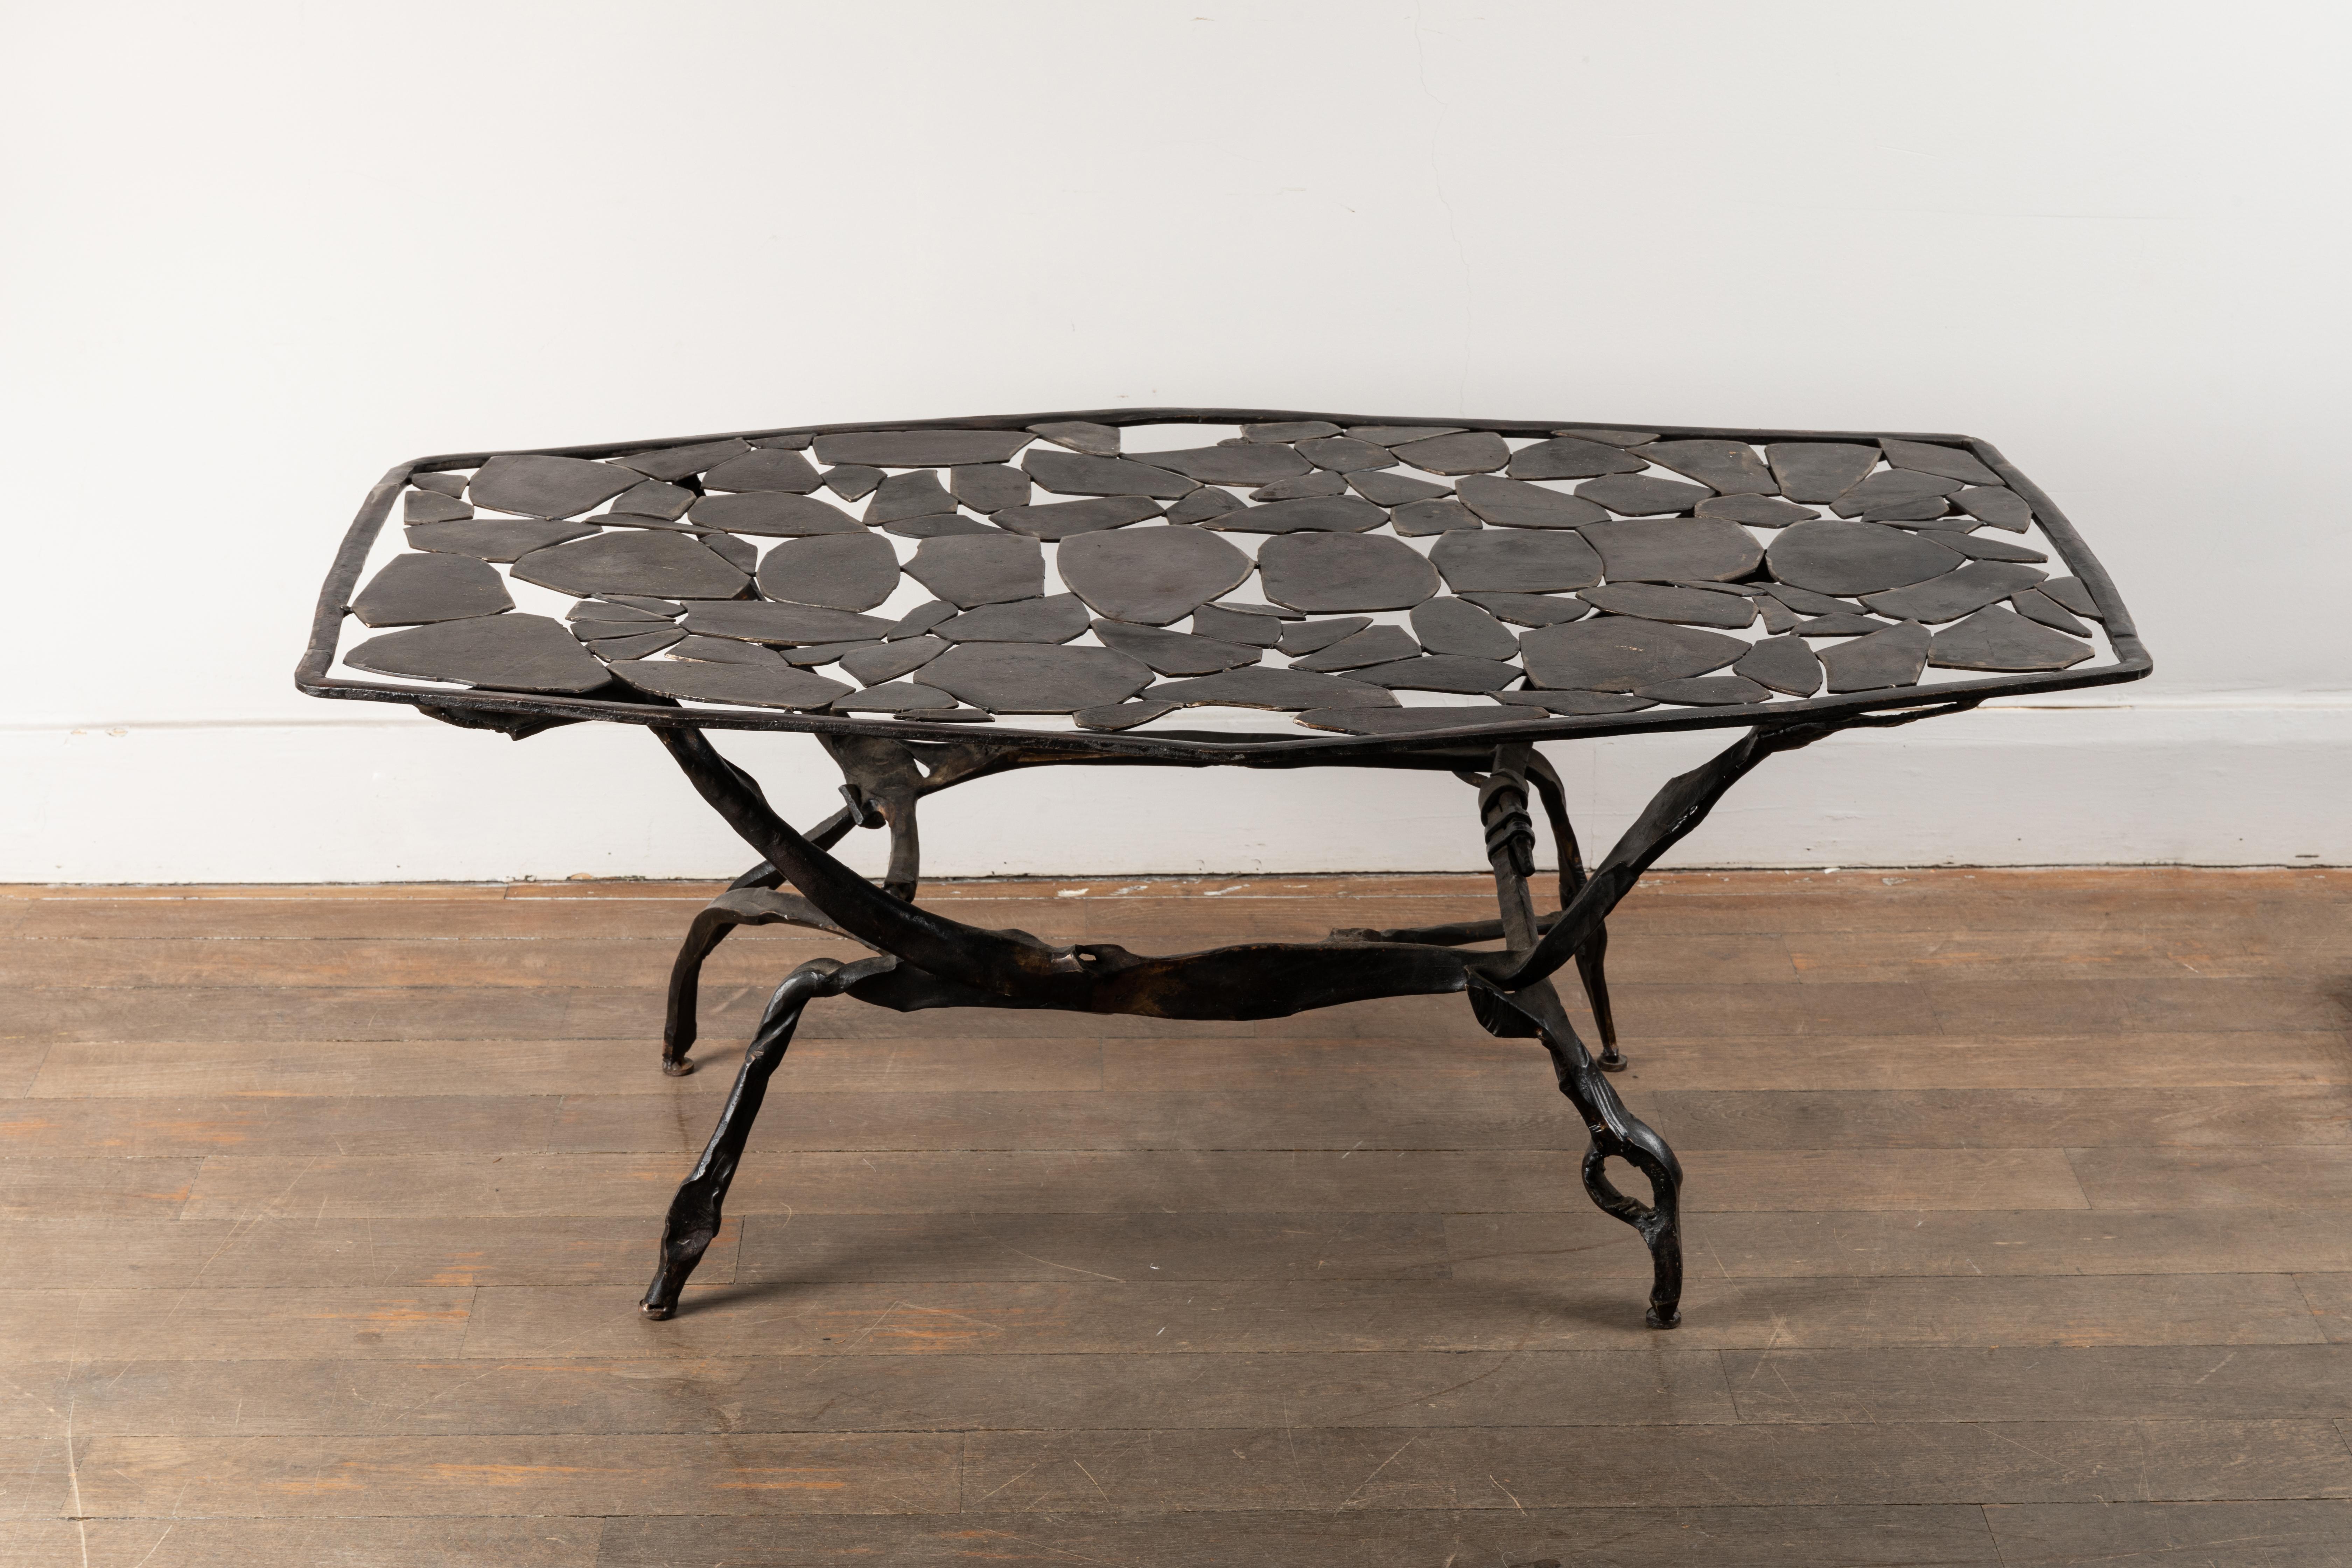 Coffee table by Nicolas Thevenin.
Forged iron.
Signed and dated: Nicolas Thévenin, Cannes 2014.
Nicolas Thévenin is the son of metal artist François Thevenin (1931-2016) and worked in his father's workshop.  

Dimensions (H x W x D):
46 x 117